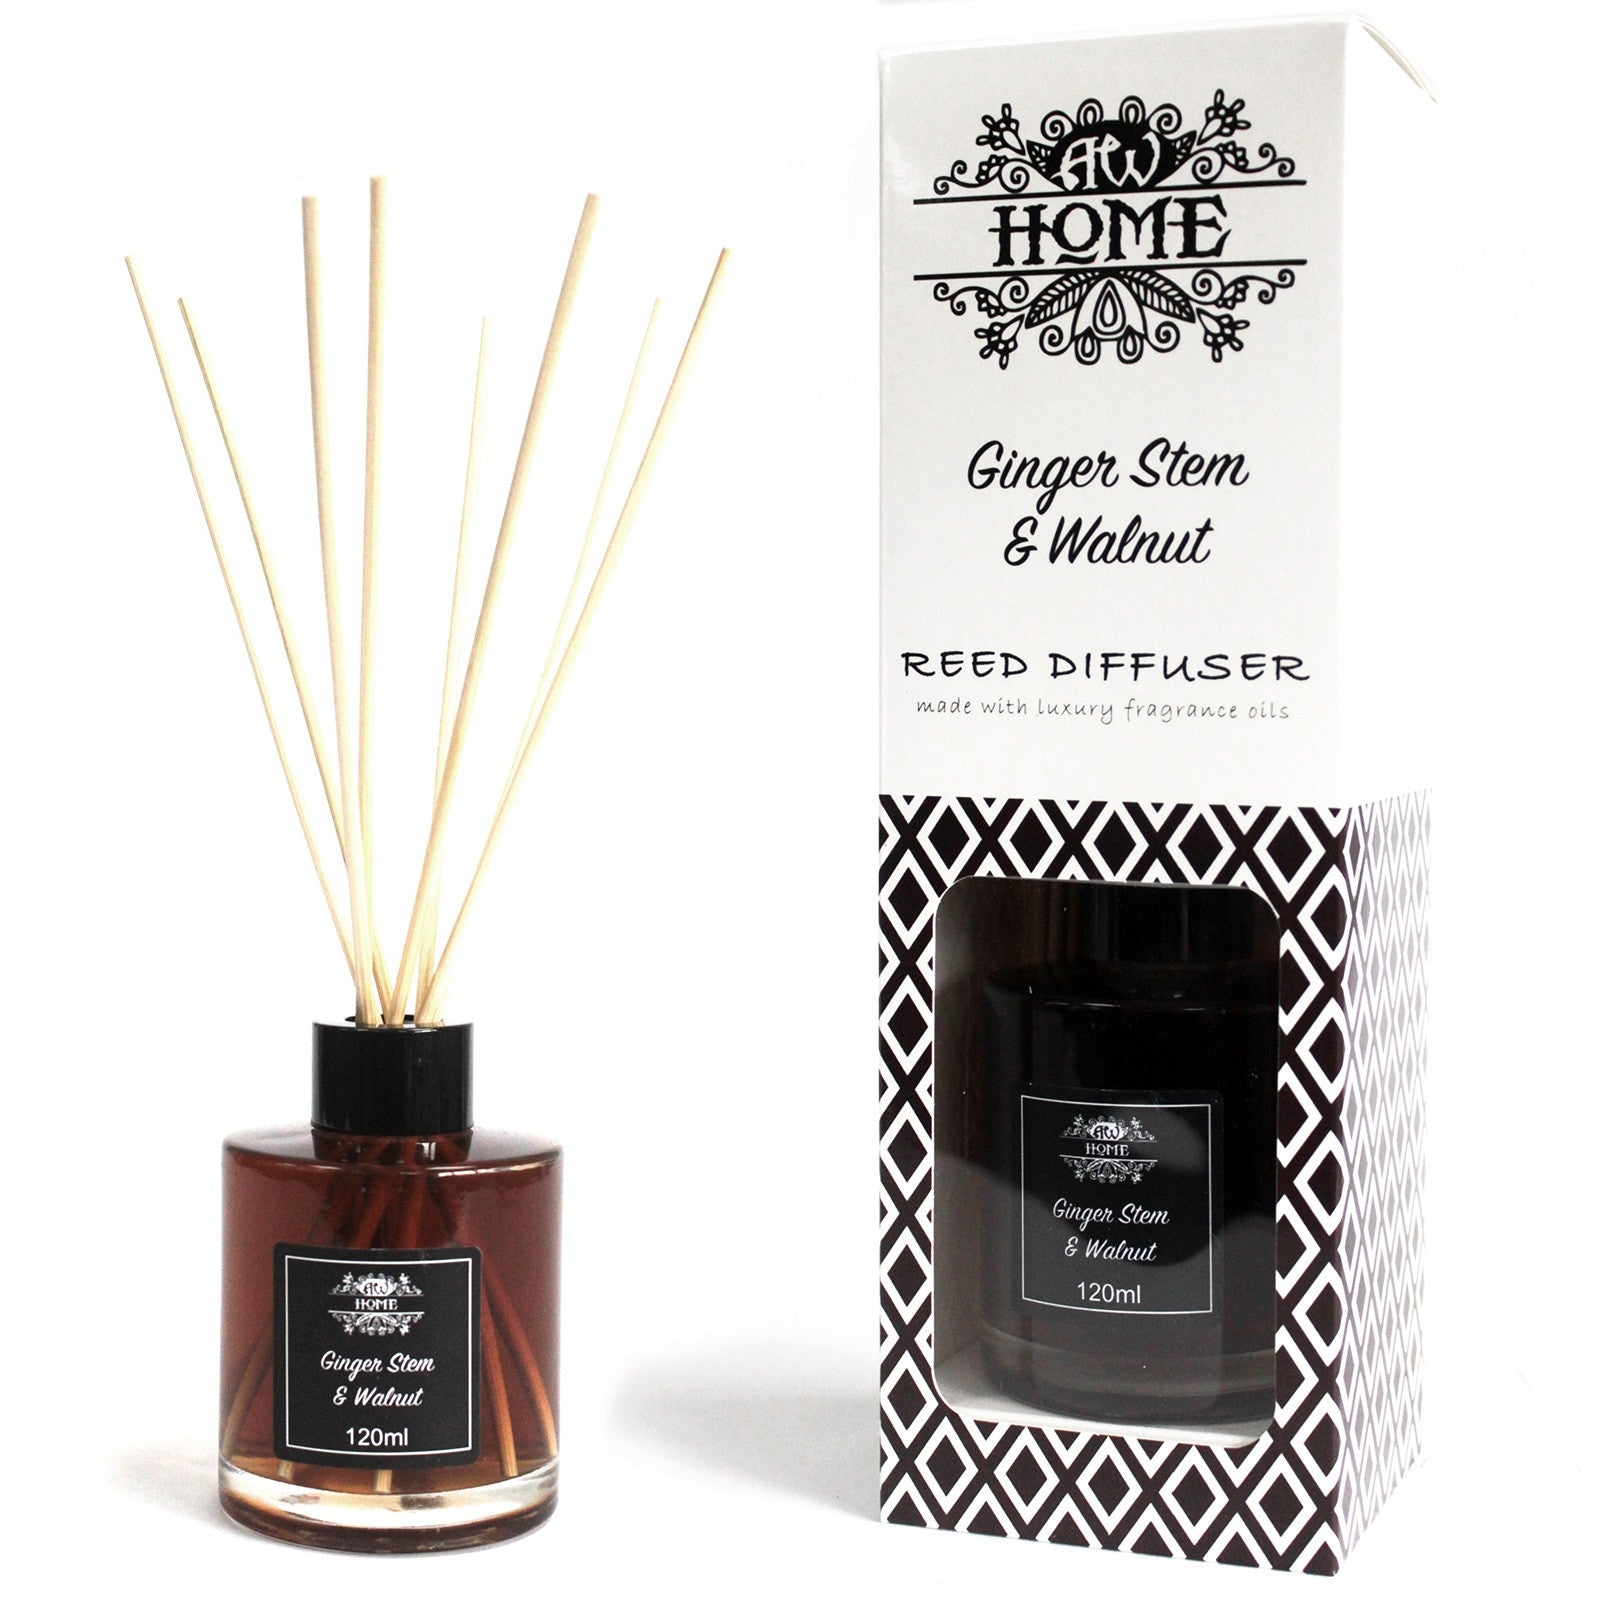 View 120ml Reed Diffuser Ginger Stem Walnut information